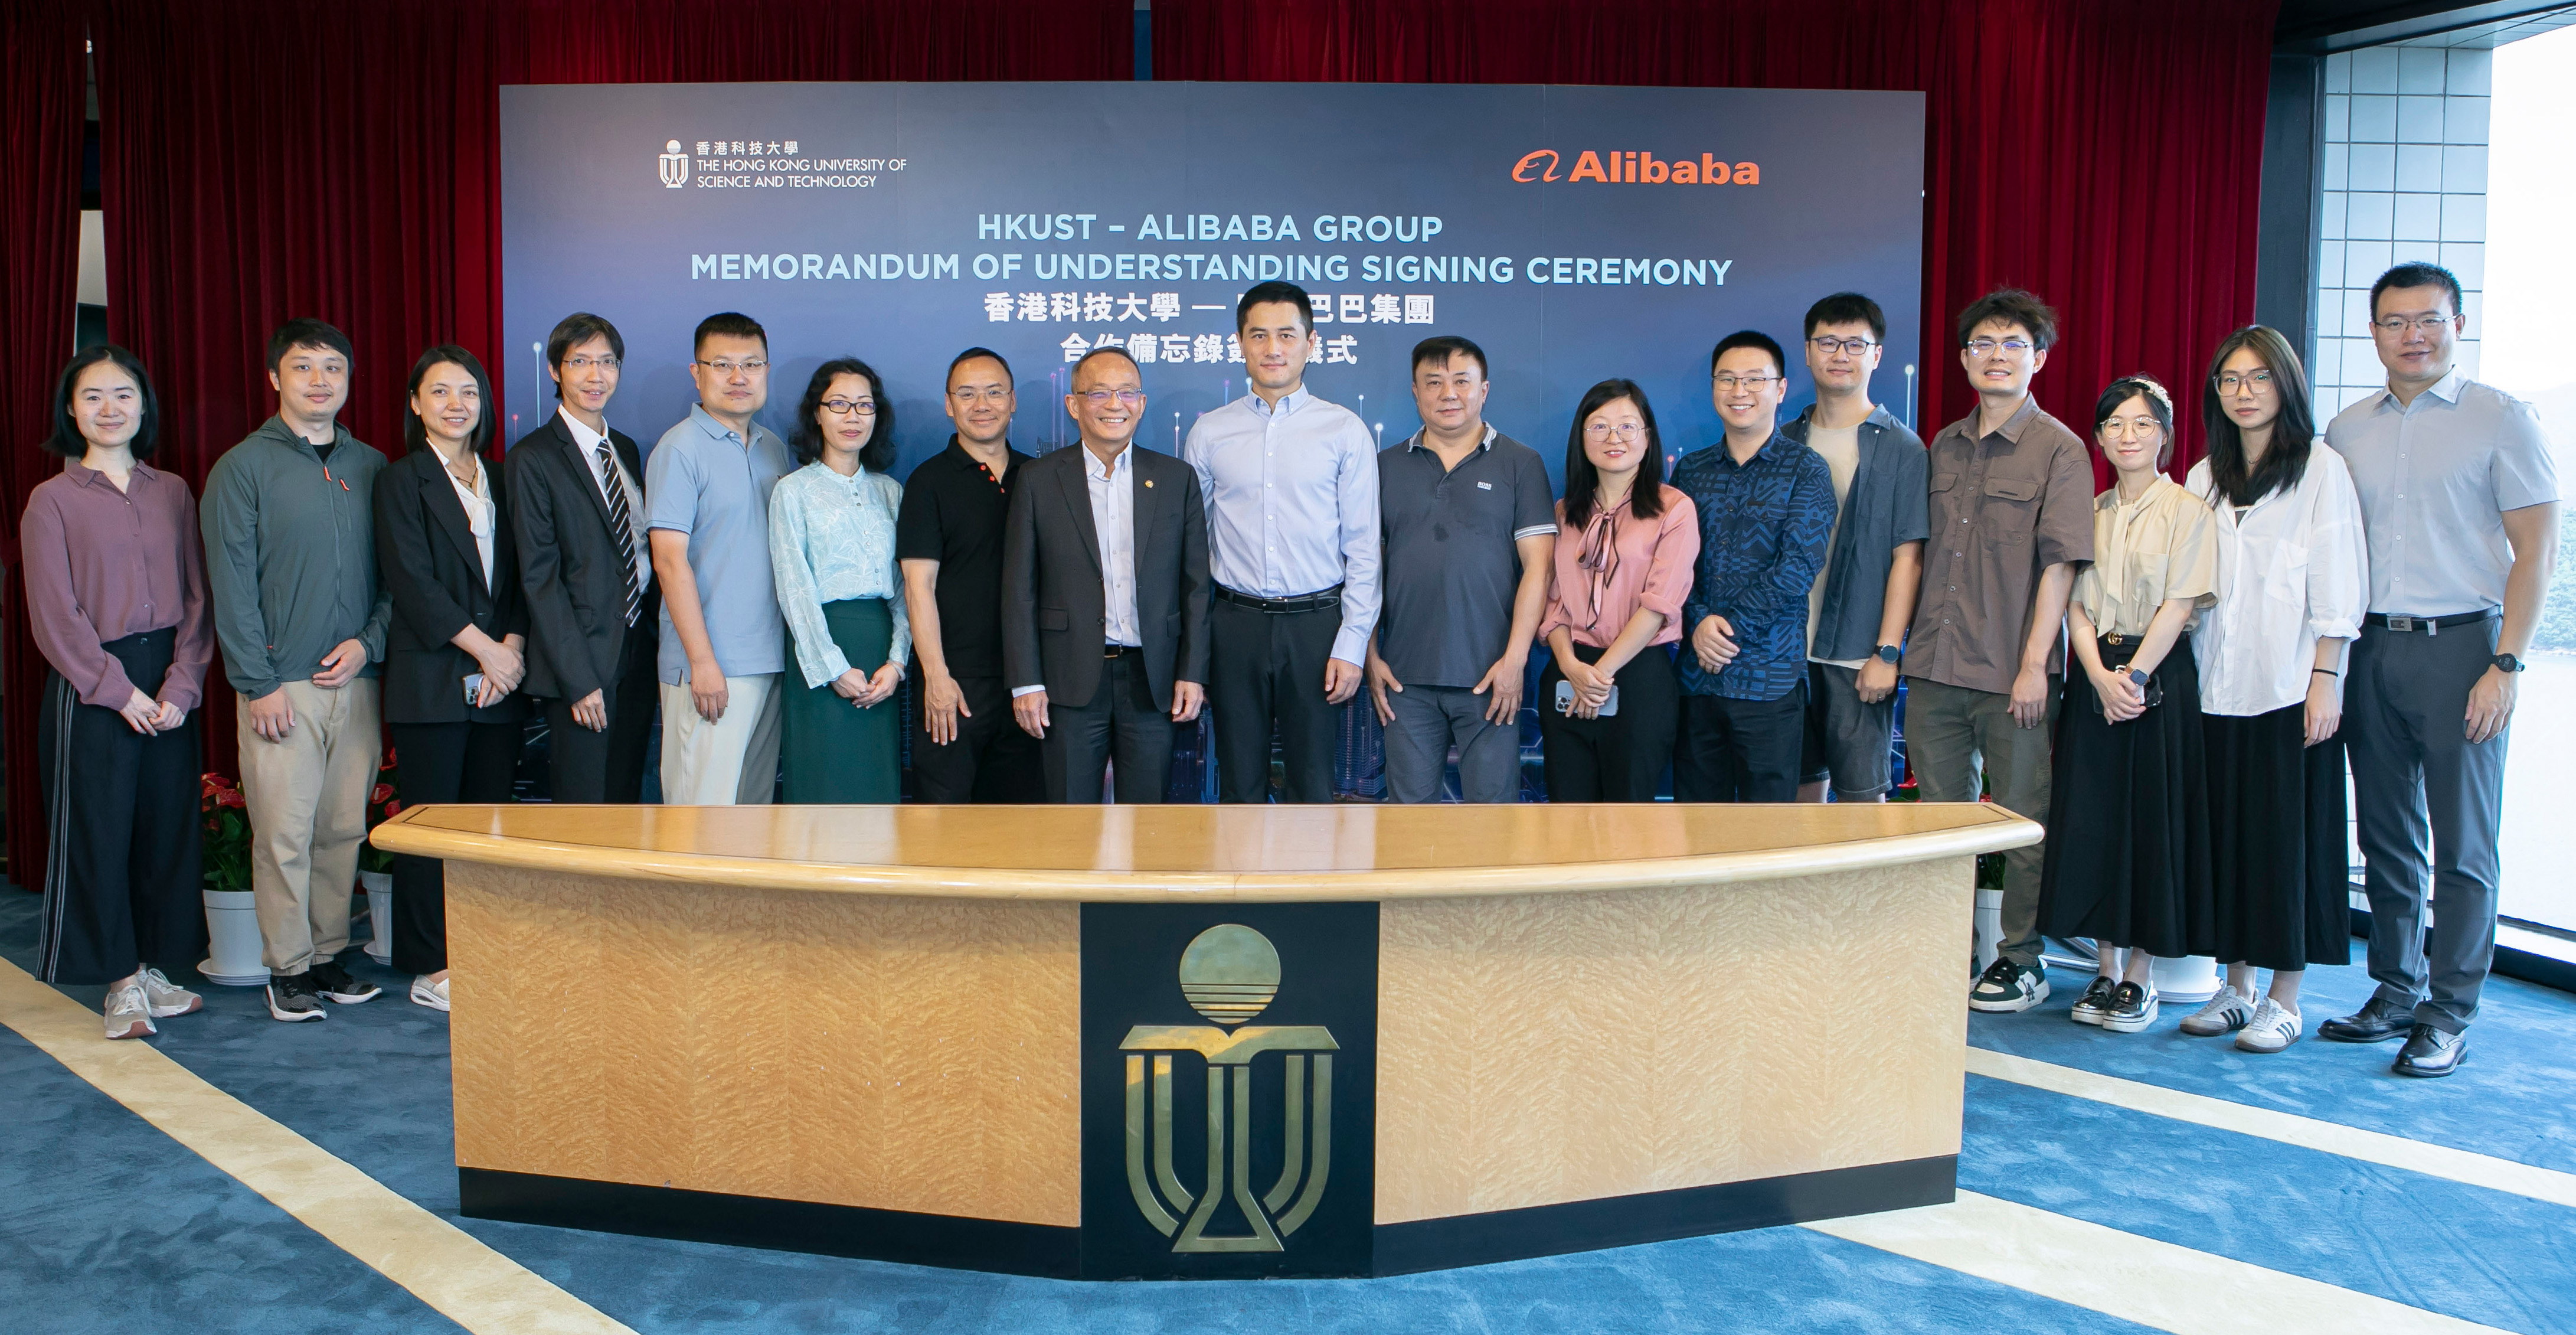 Group photo of Chief Technology Officer Wu Zeming and the working team from Alibaba Group, HKUST Vice-President (Research & Development) Prof. Tim Cheng and HKUST members.